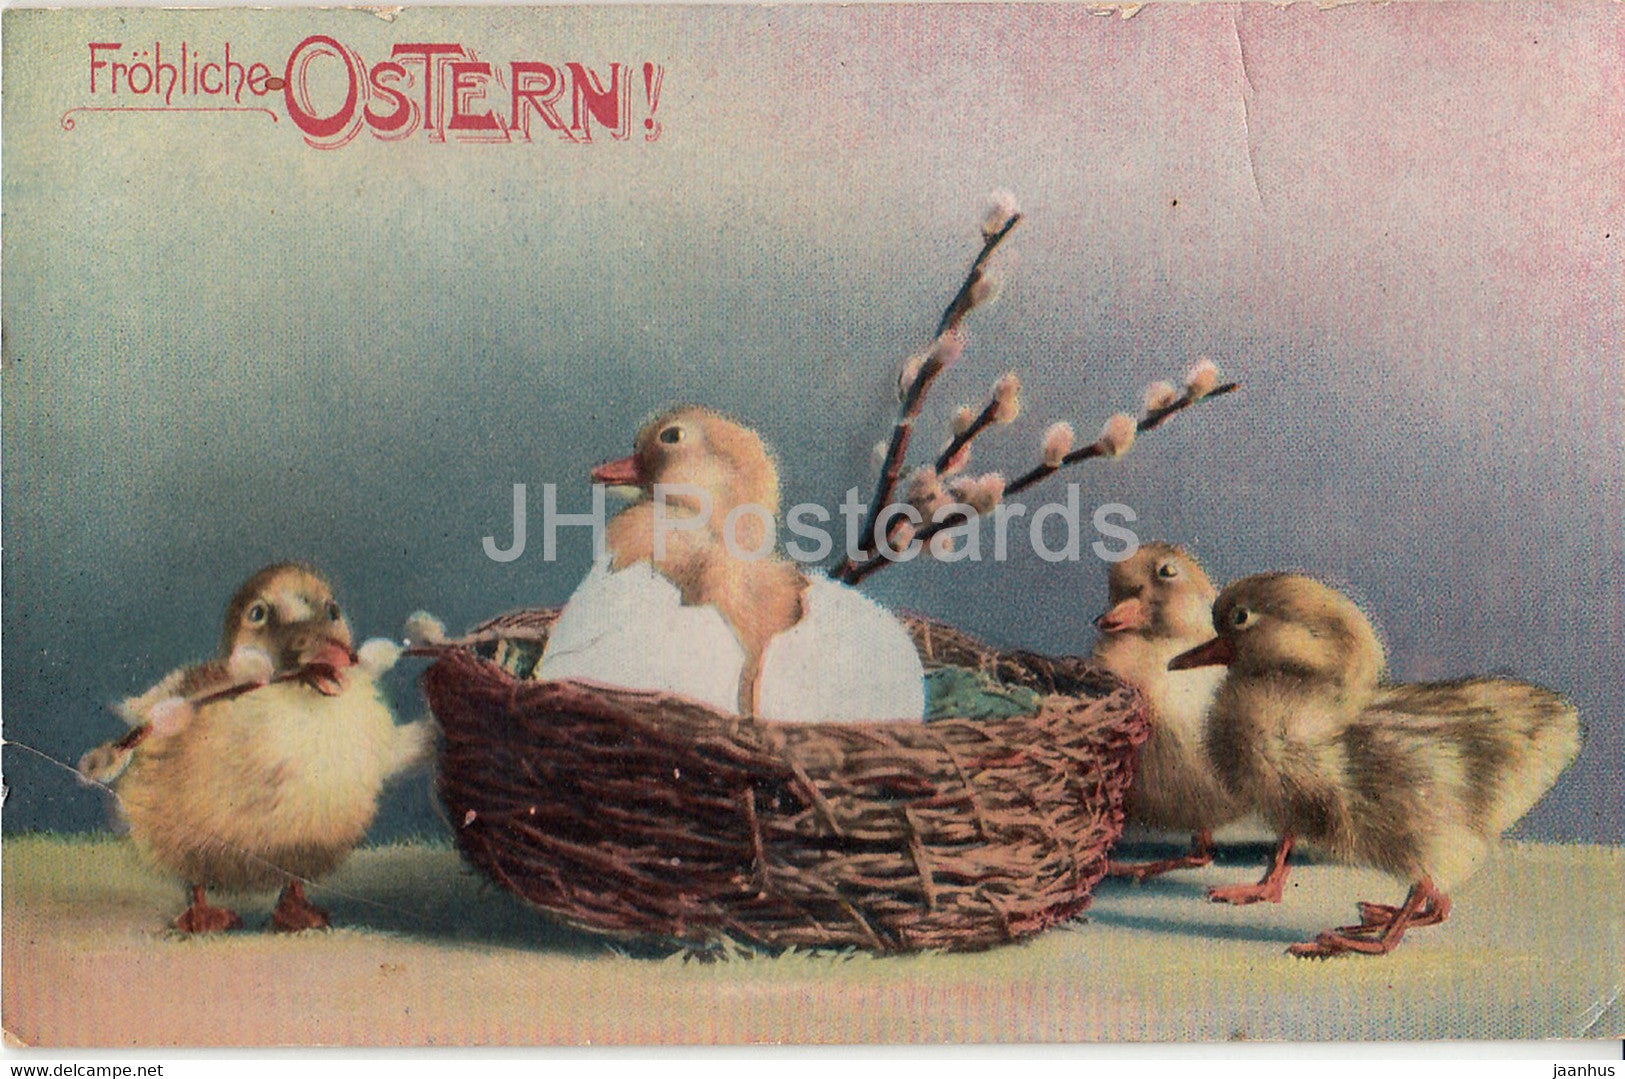 Easter Greeting Card - Frohliche Ostern - duckling - Serie 1992 - old postcard - 1914 - Germany - used - JH Postcards